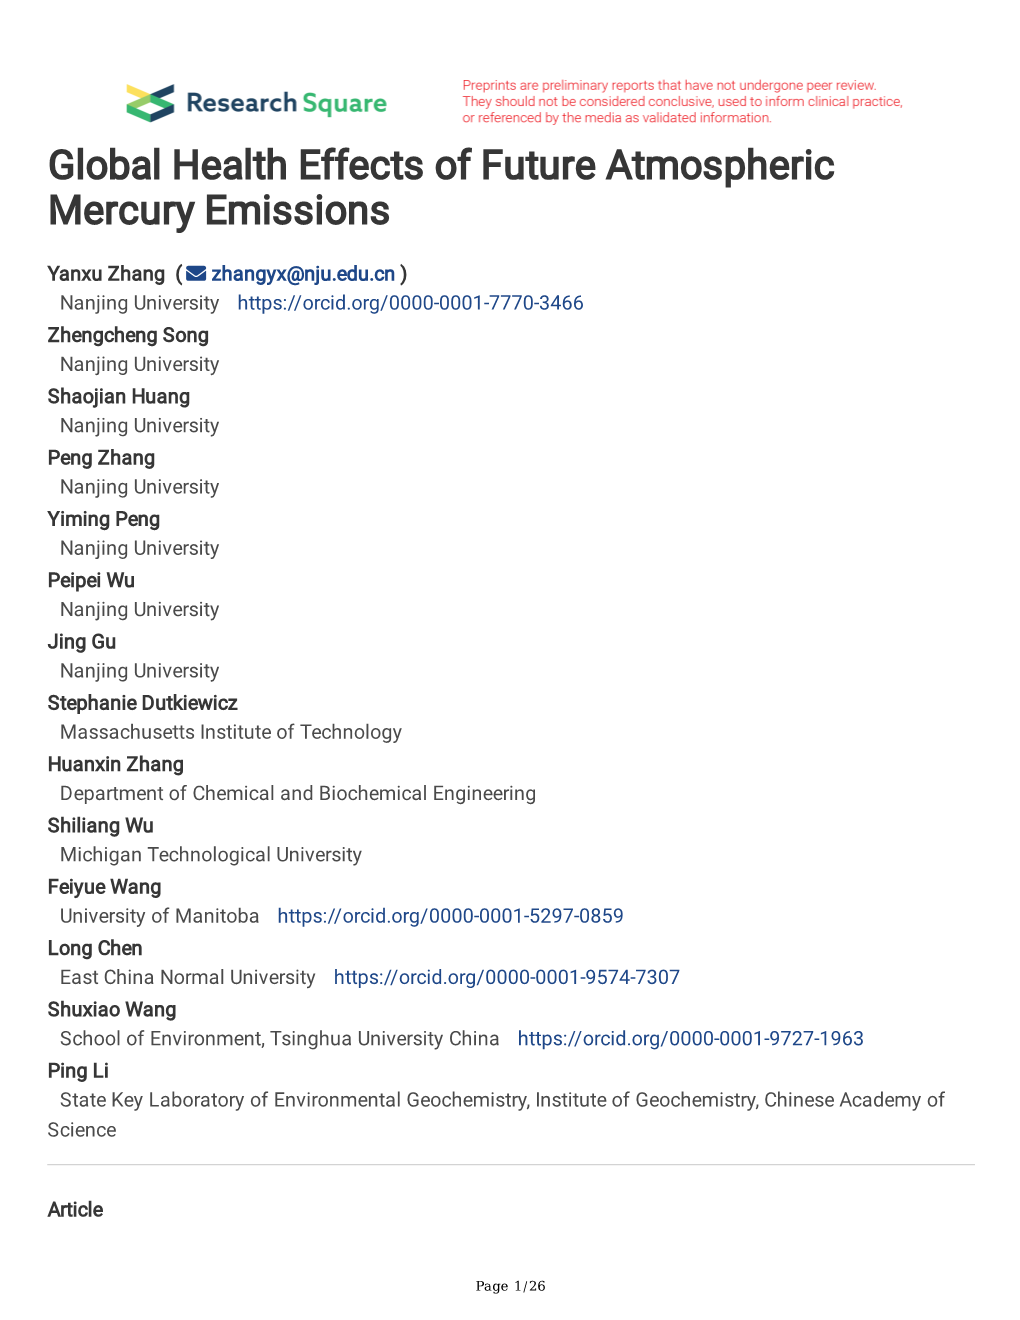 Global Health Effects of Future Atmospheric Mercury Emissions